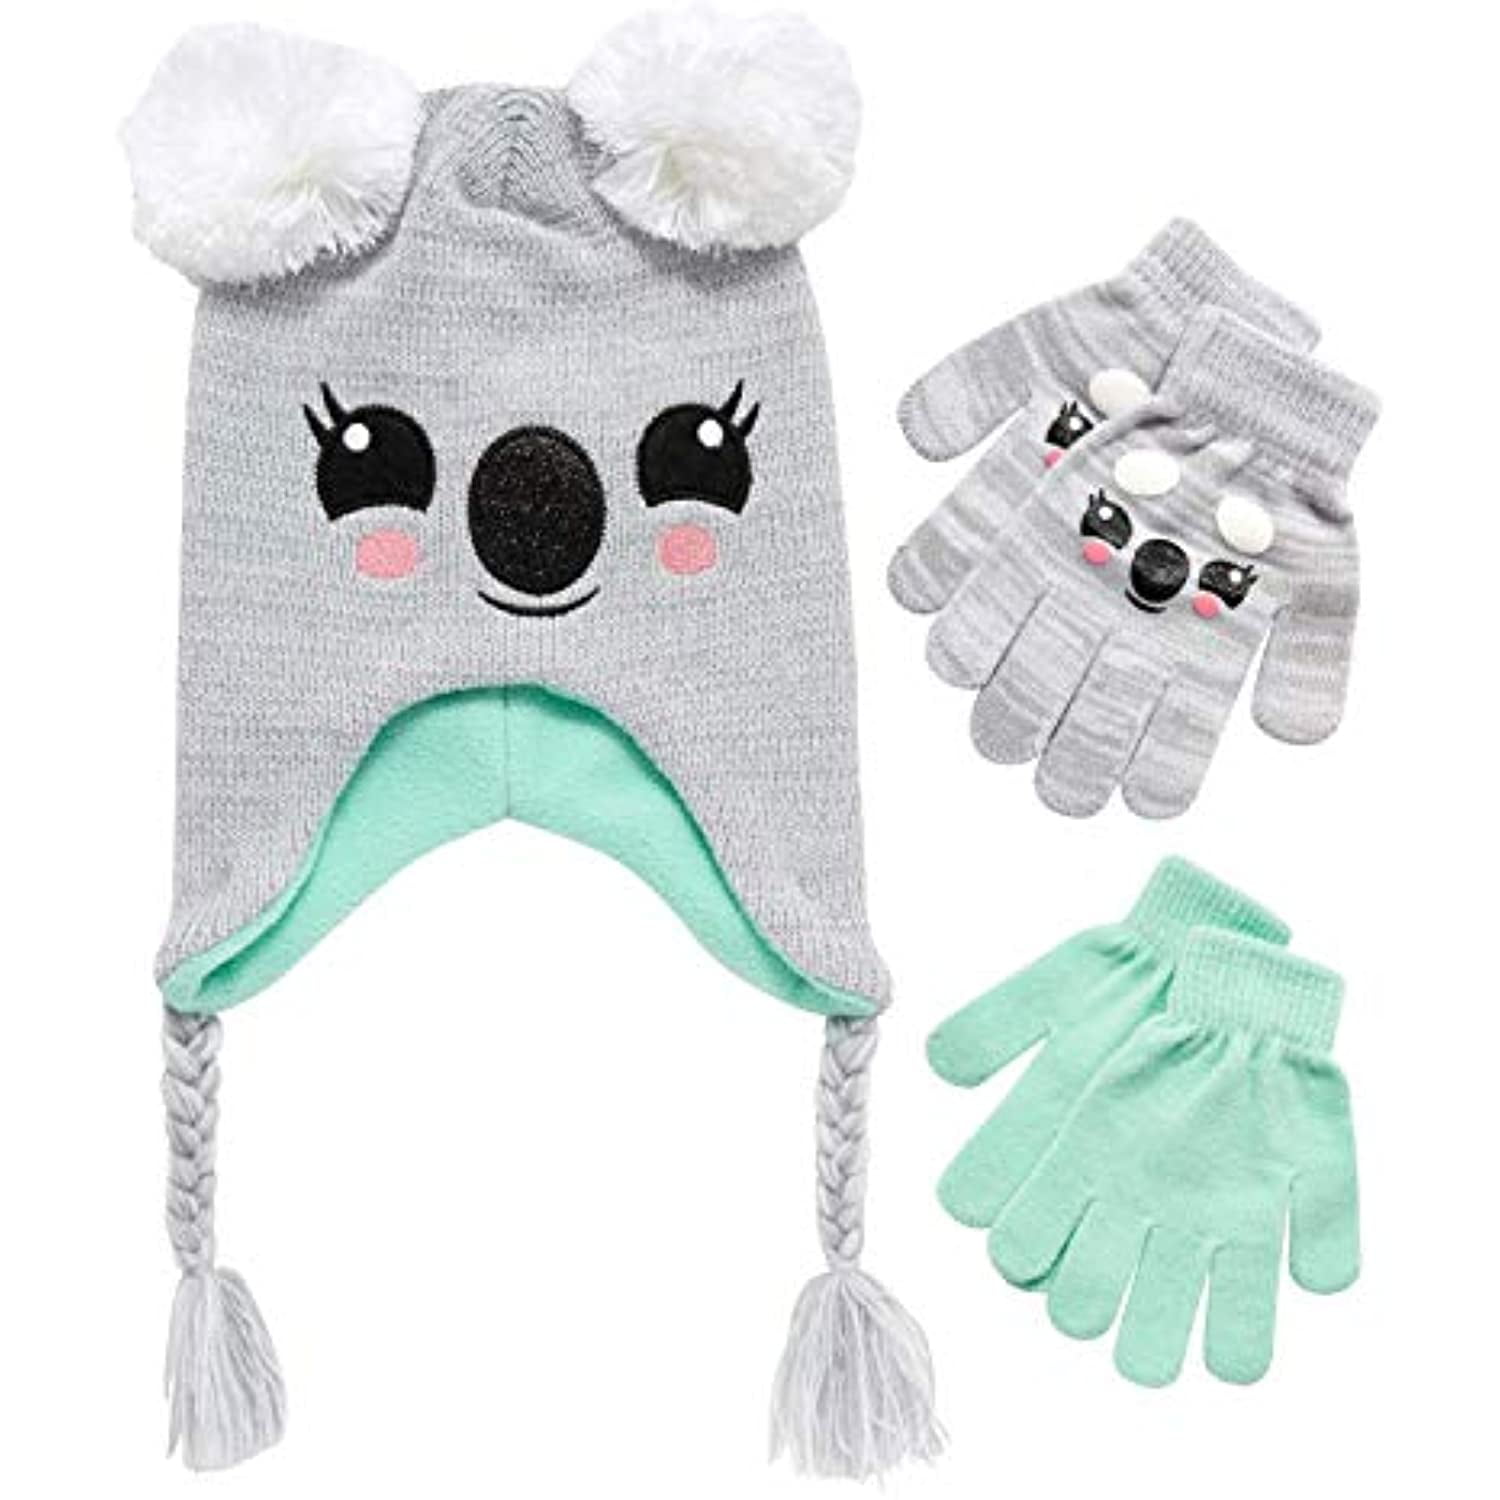 ABG Accessories Big Girls Critter Collection Acrylic Knit Winter Laplander Hat and Matching Glove Set 